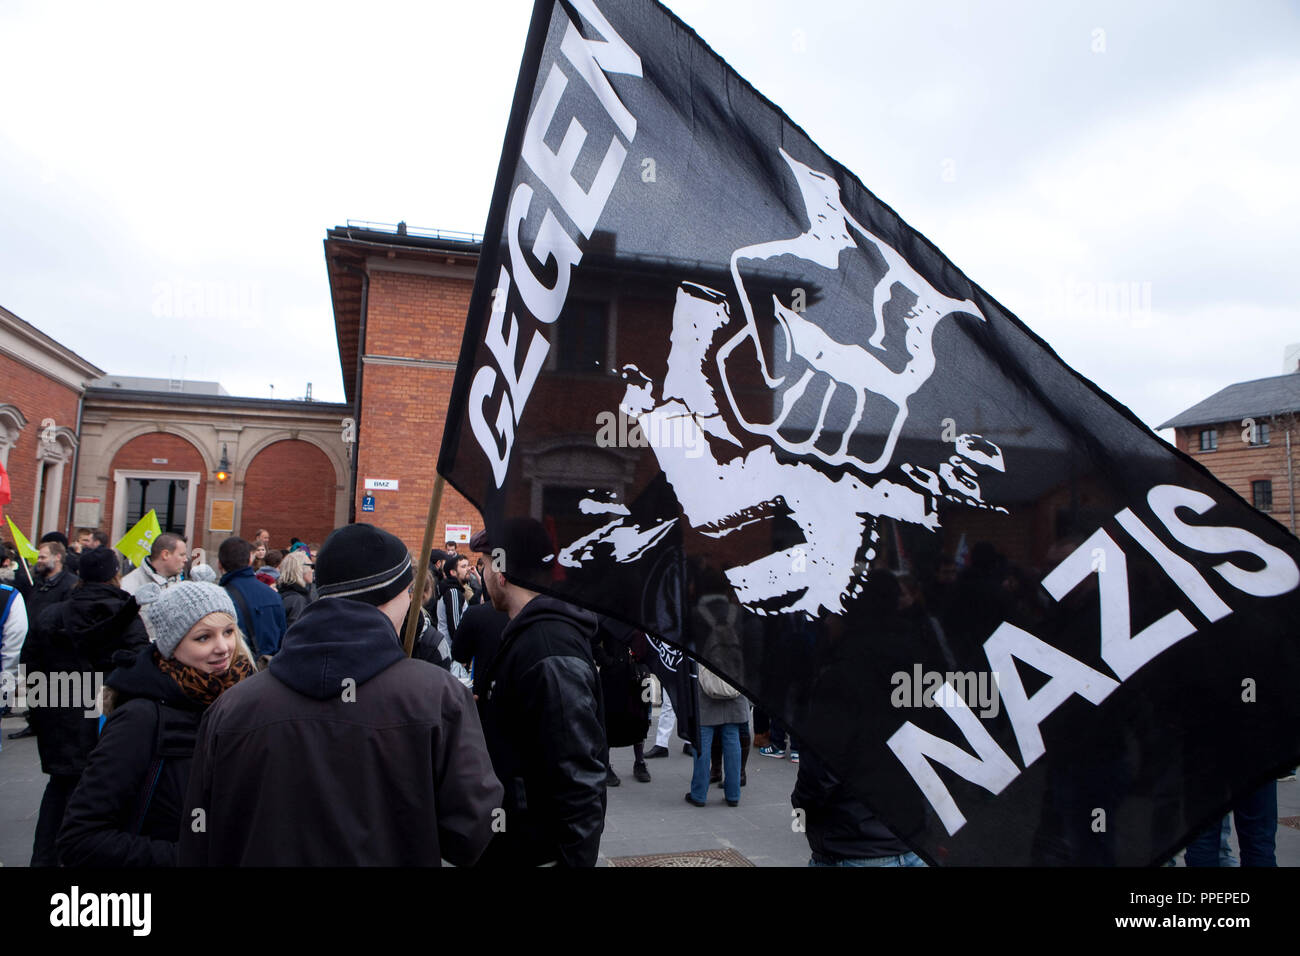 The alliance against Nazi terror and racism has called for a demonstration against the neonazi-residential community in the Carl-Hanser-Straße in Obermenzing. 'Against Nazis' is written on the flag at the Bahnhofsvorplatz in Munich, Germany Stock Photo